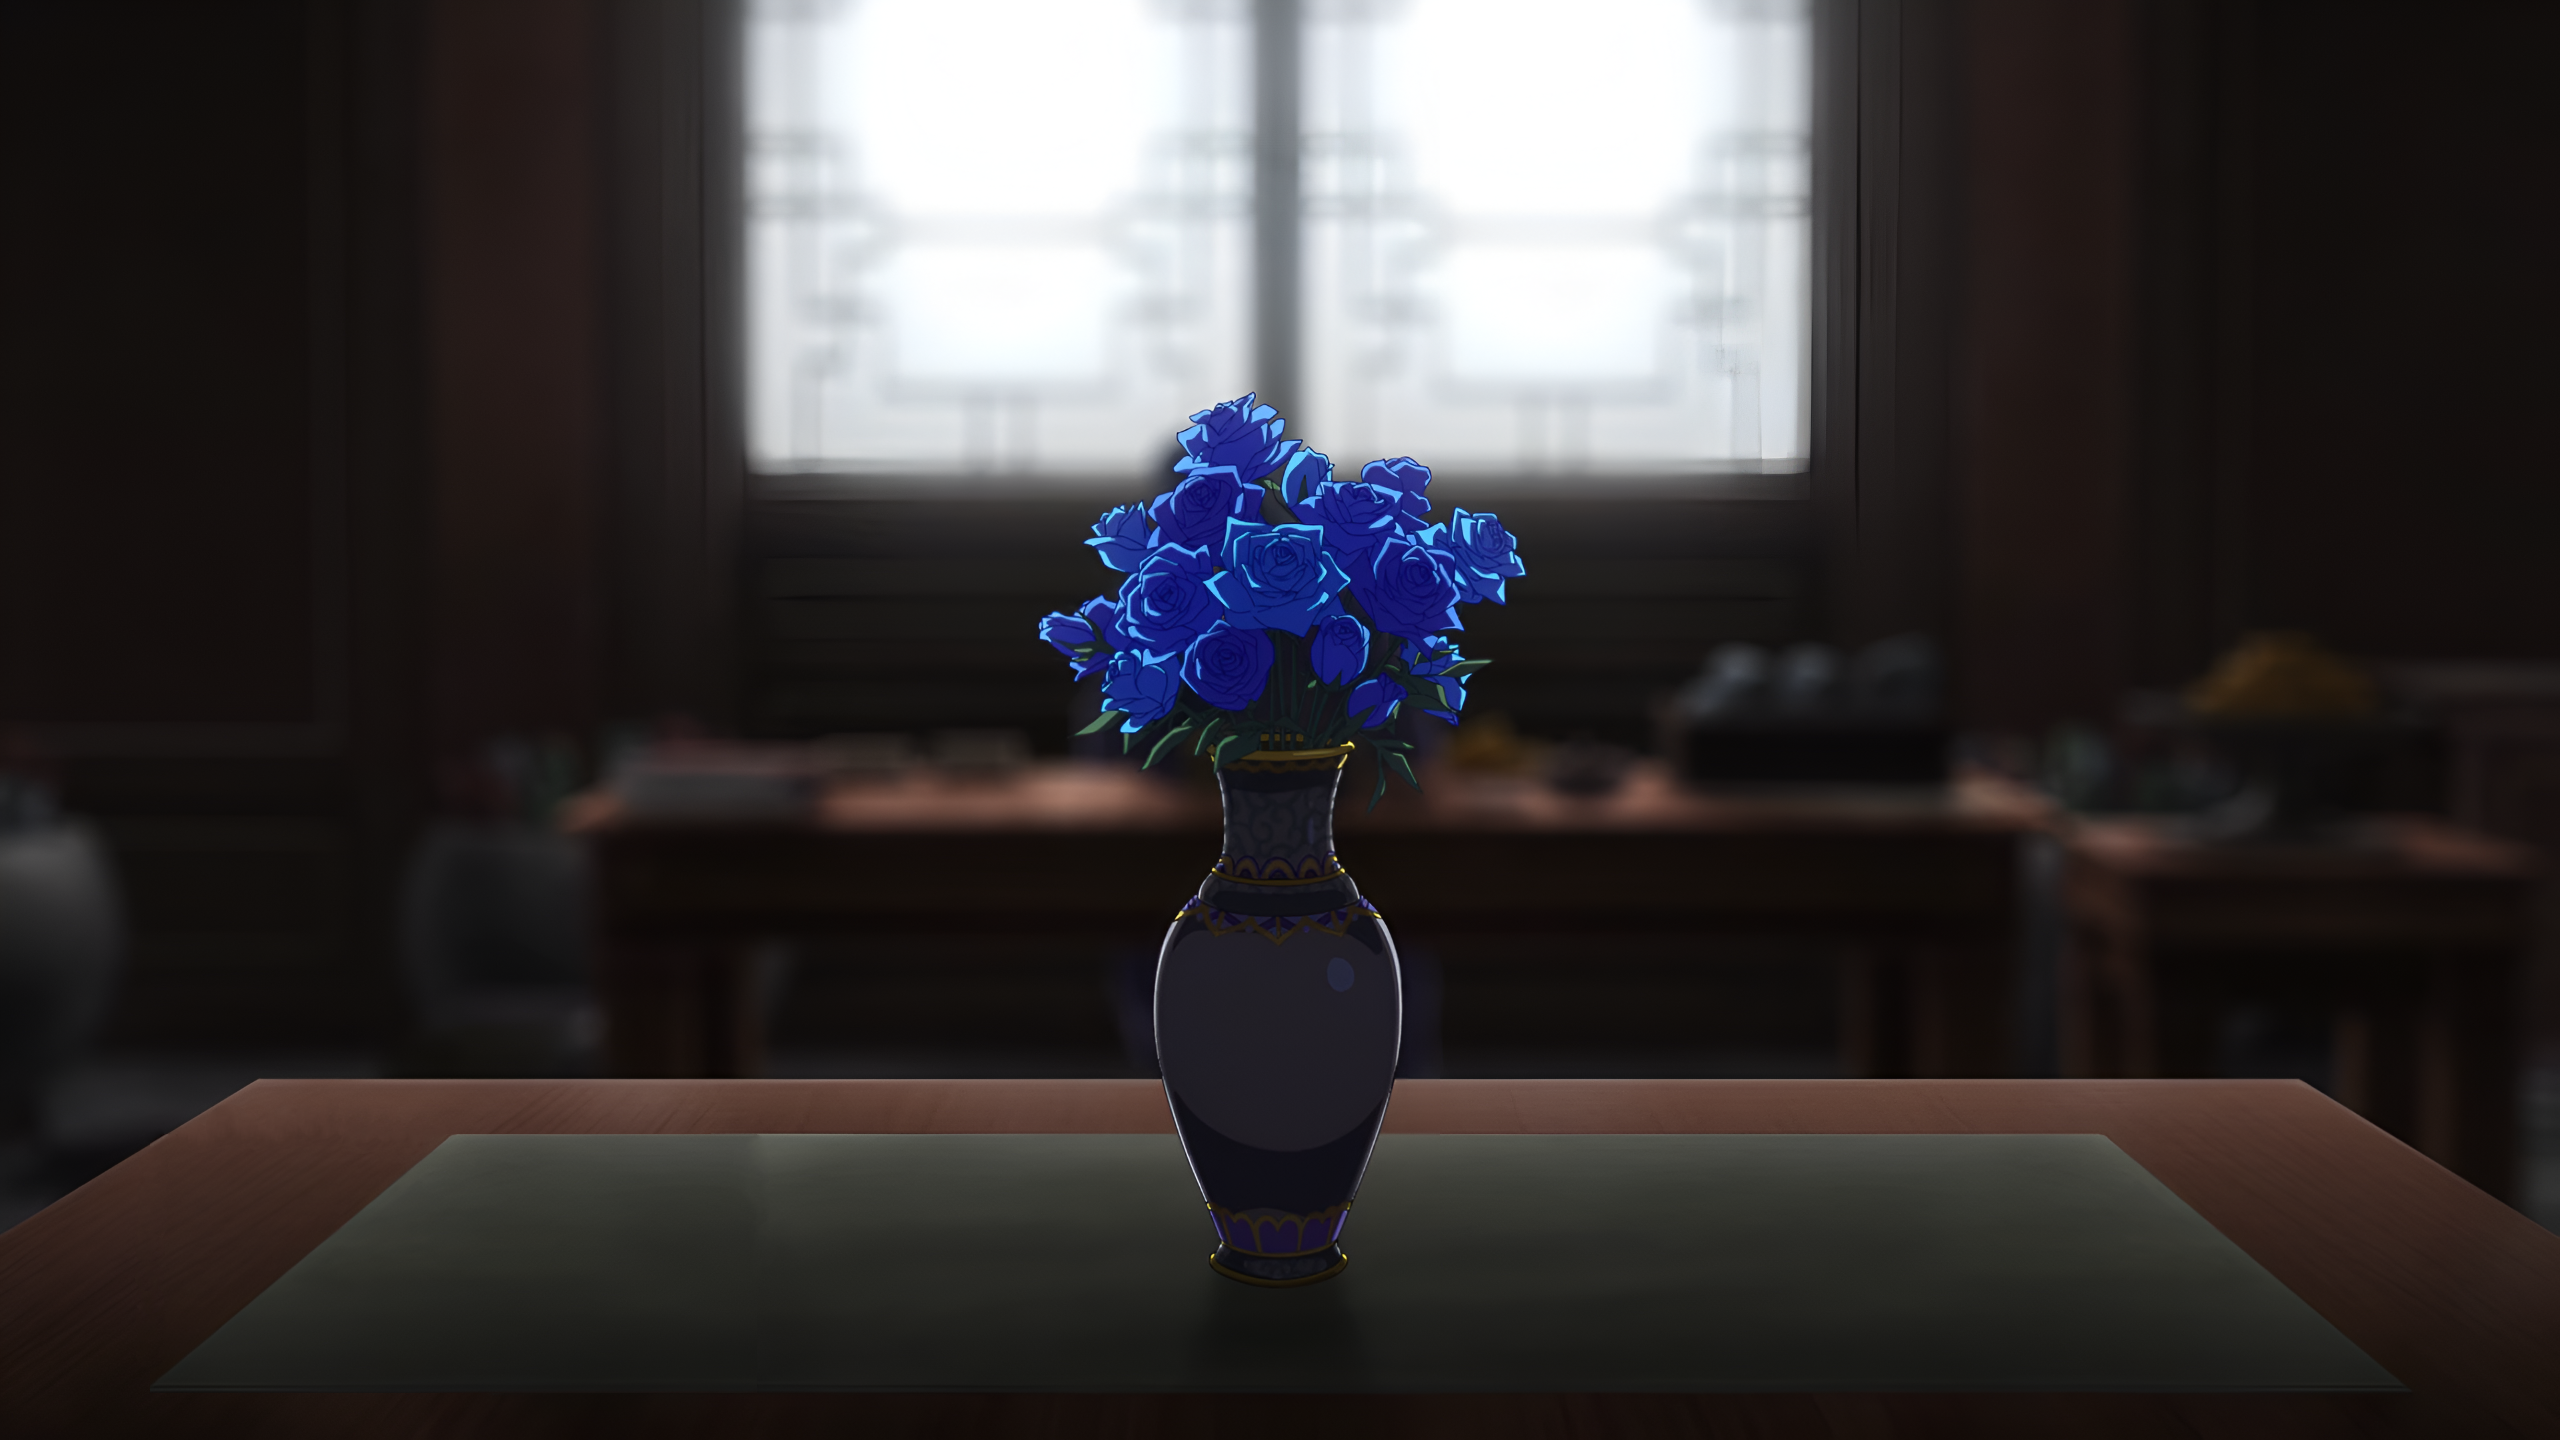 Anime 2560x1440 The Apothecary Diaries vases blue rose rose indoors depth of field blurred blurry background anime Anime screenshot leaves digital art window sunlight table